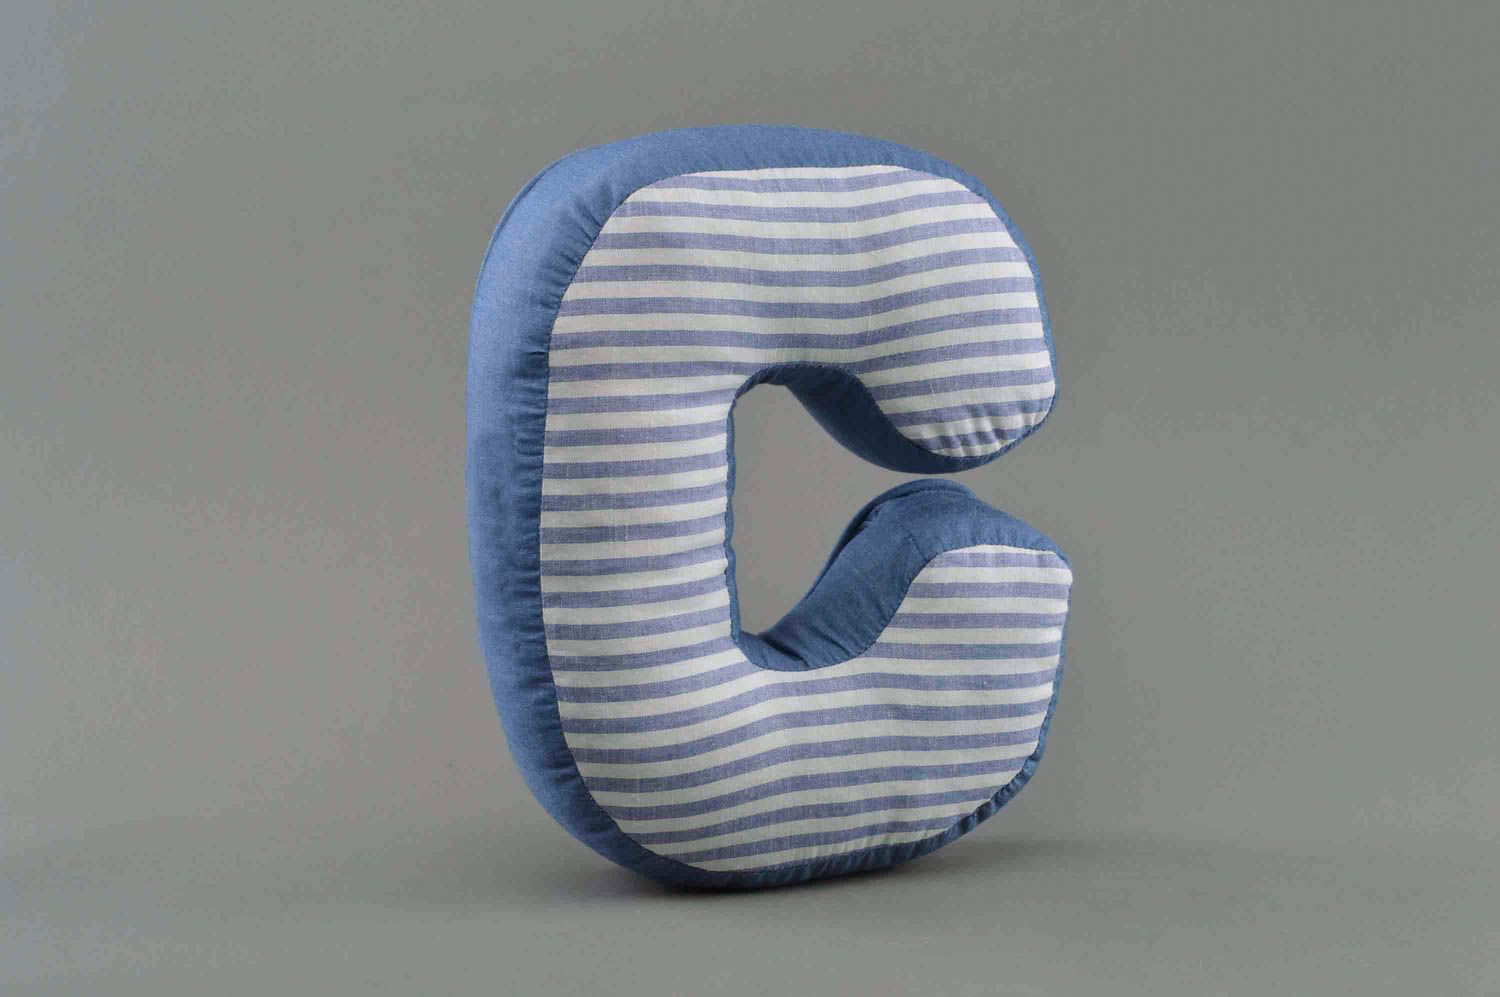 Homemade decorative soft toy pillow letter C sewn of blue and stripped fabric photo 1